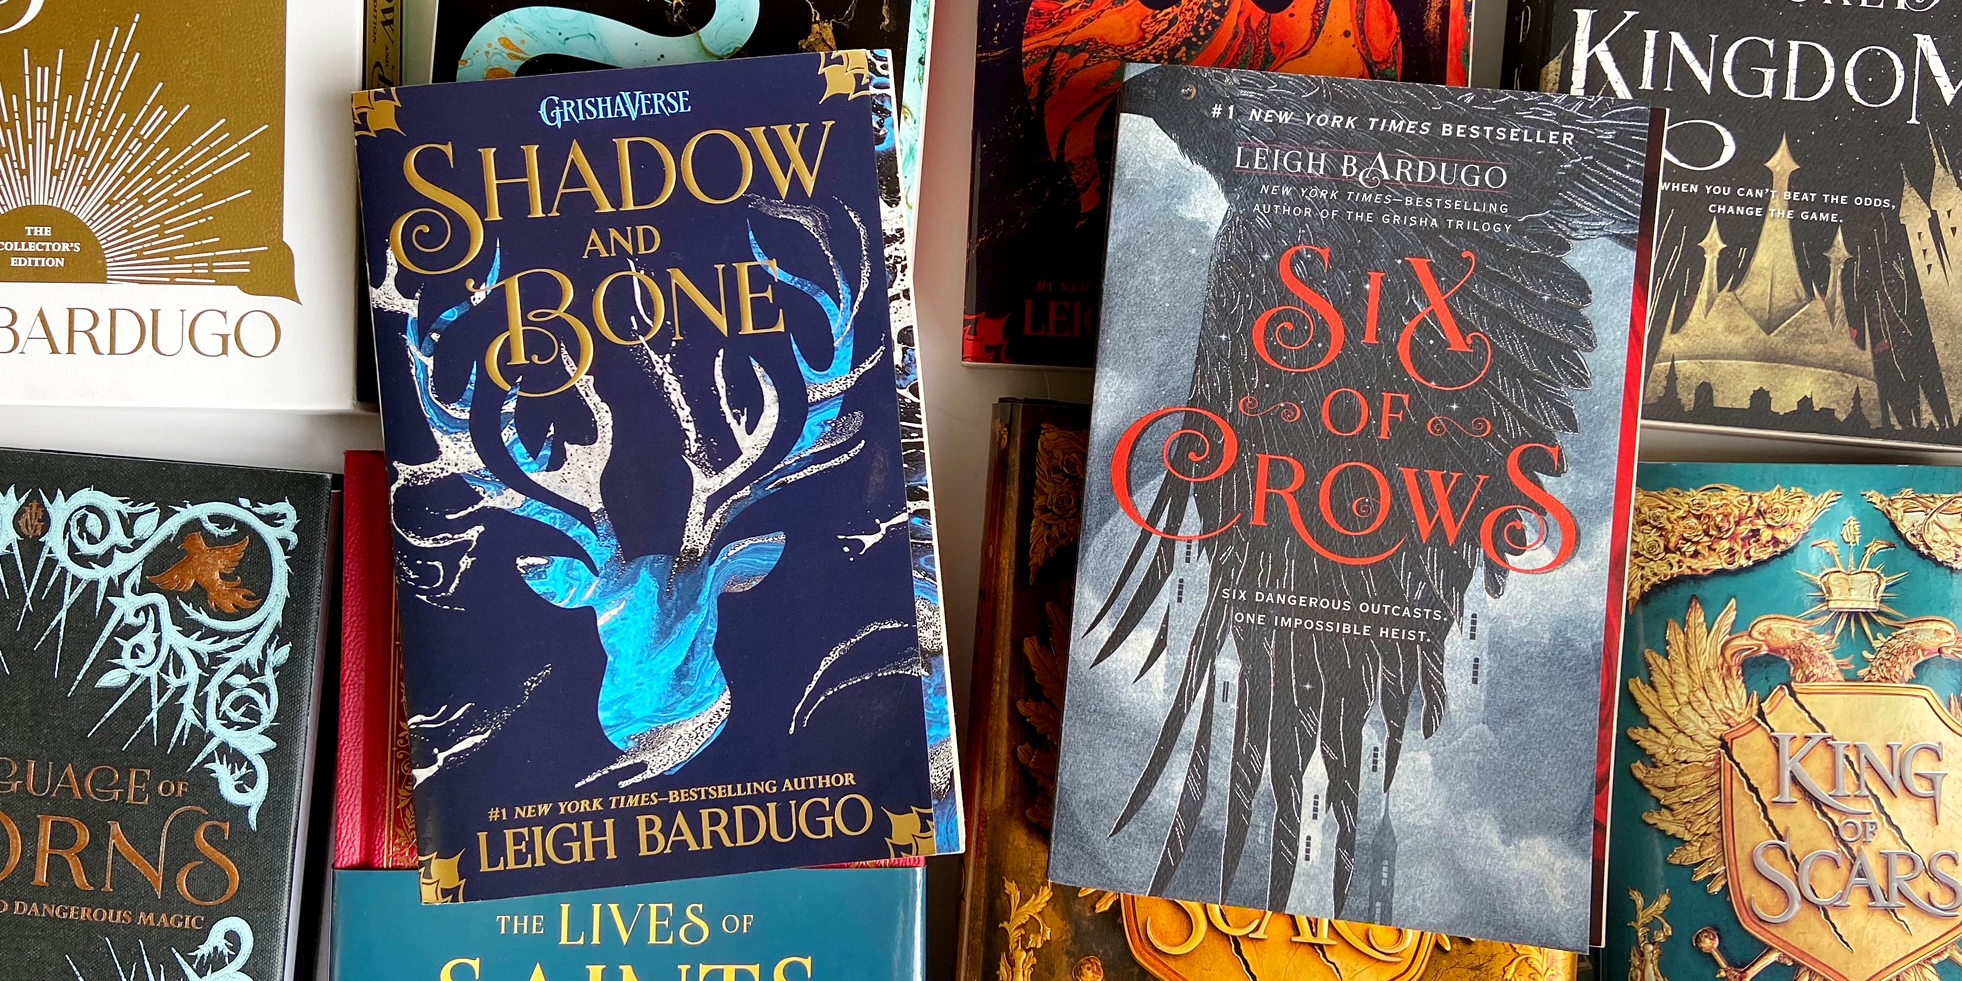 Beyond Shadow and Bone: Your Guide to Leigh Bardugo's Grishaverse